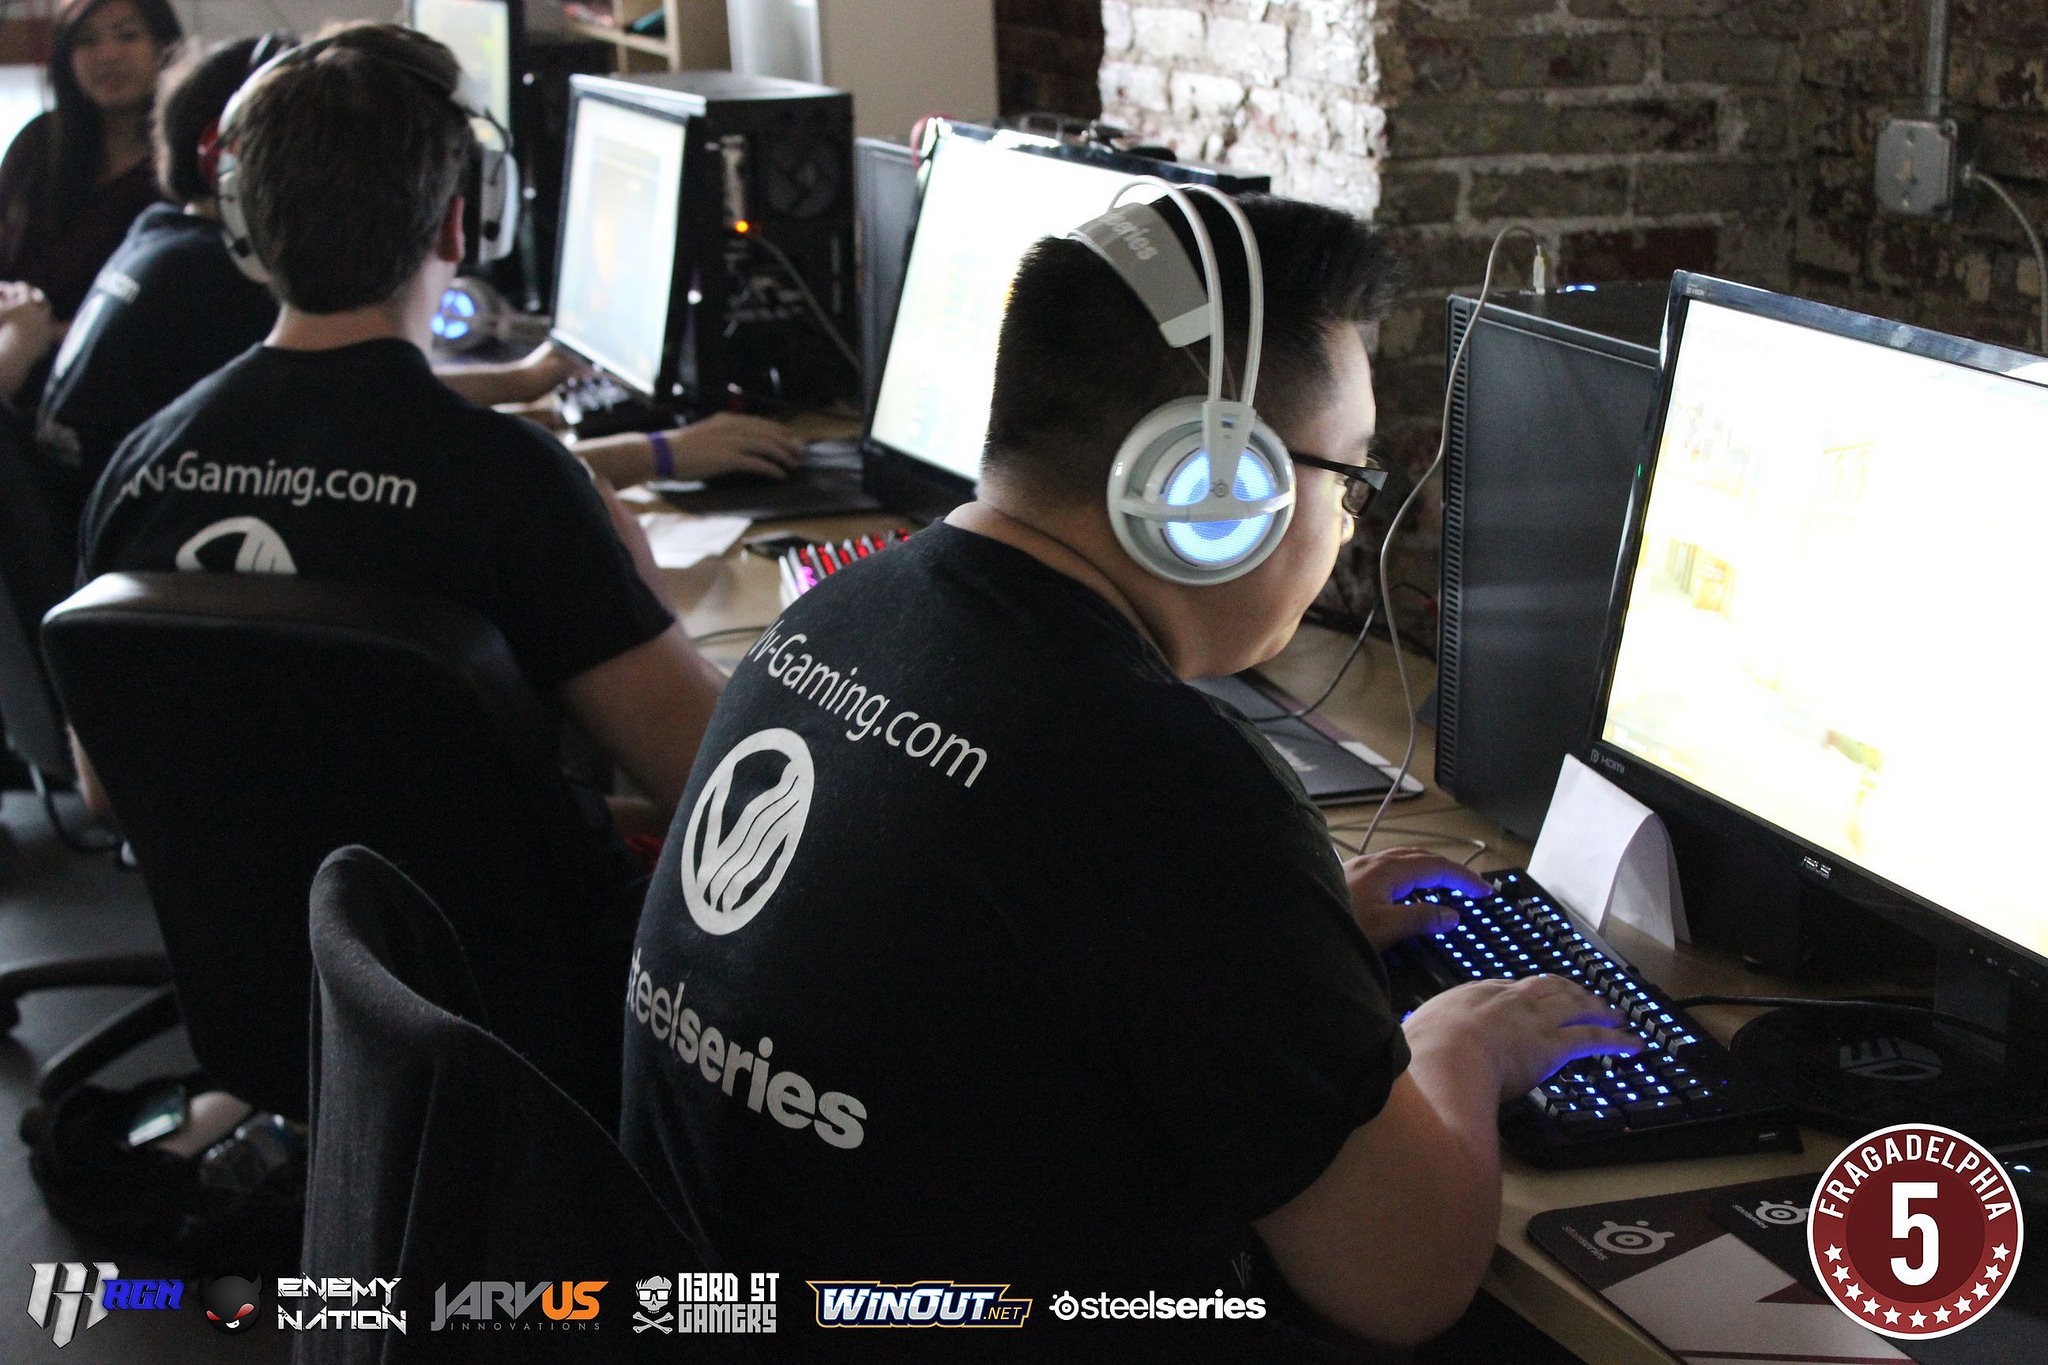 Teams compete in “Counter-Strike: Global Offensive” at Fragadelphia 5, a quarterly tournament held by N3rd Street Gamers.